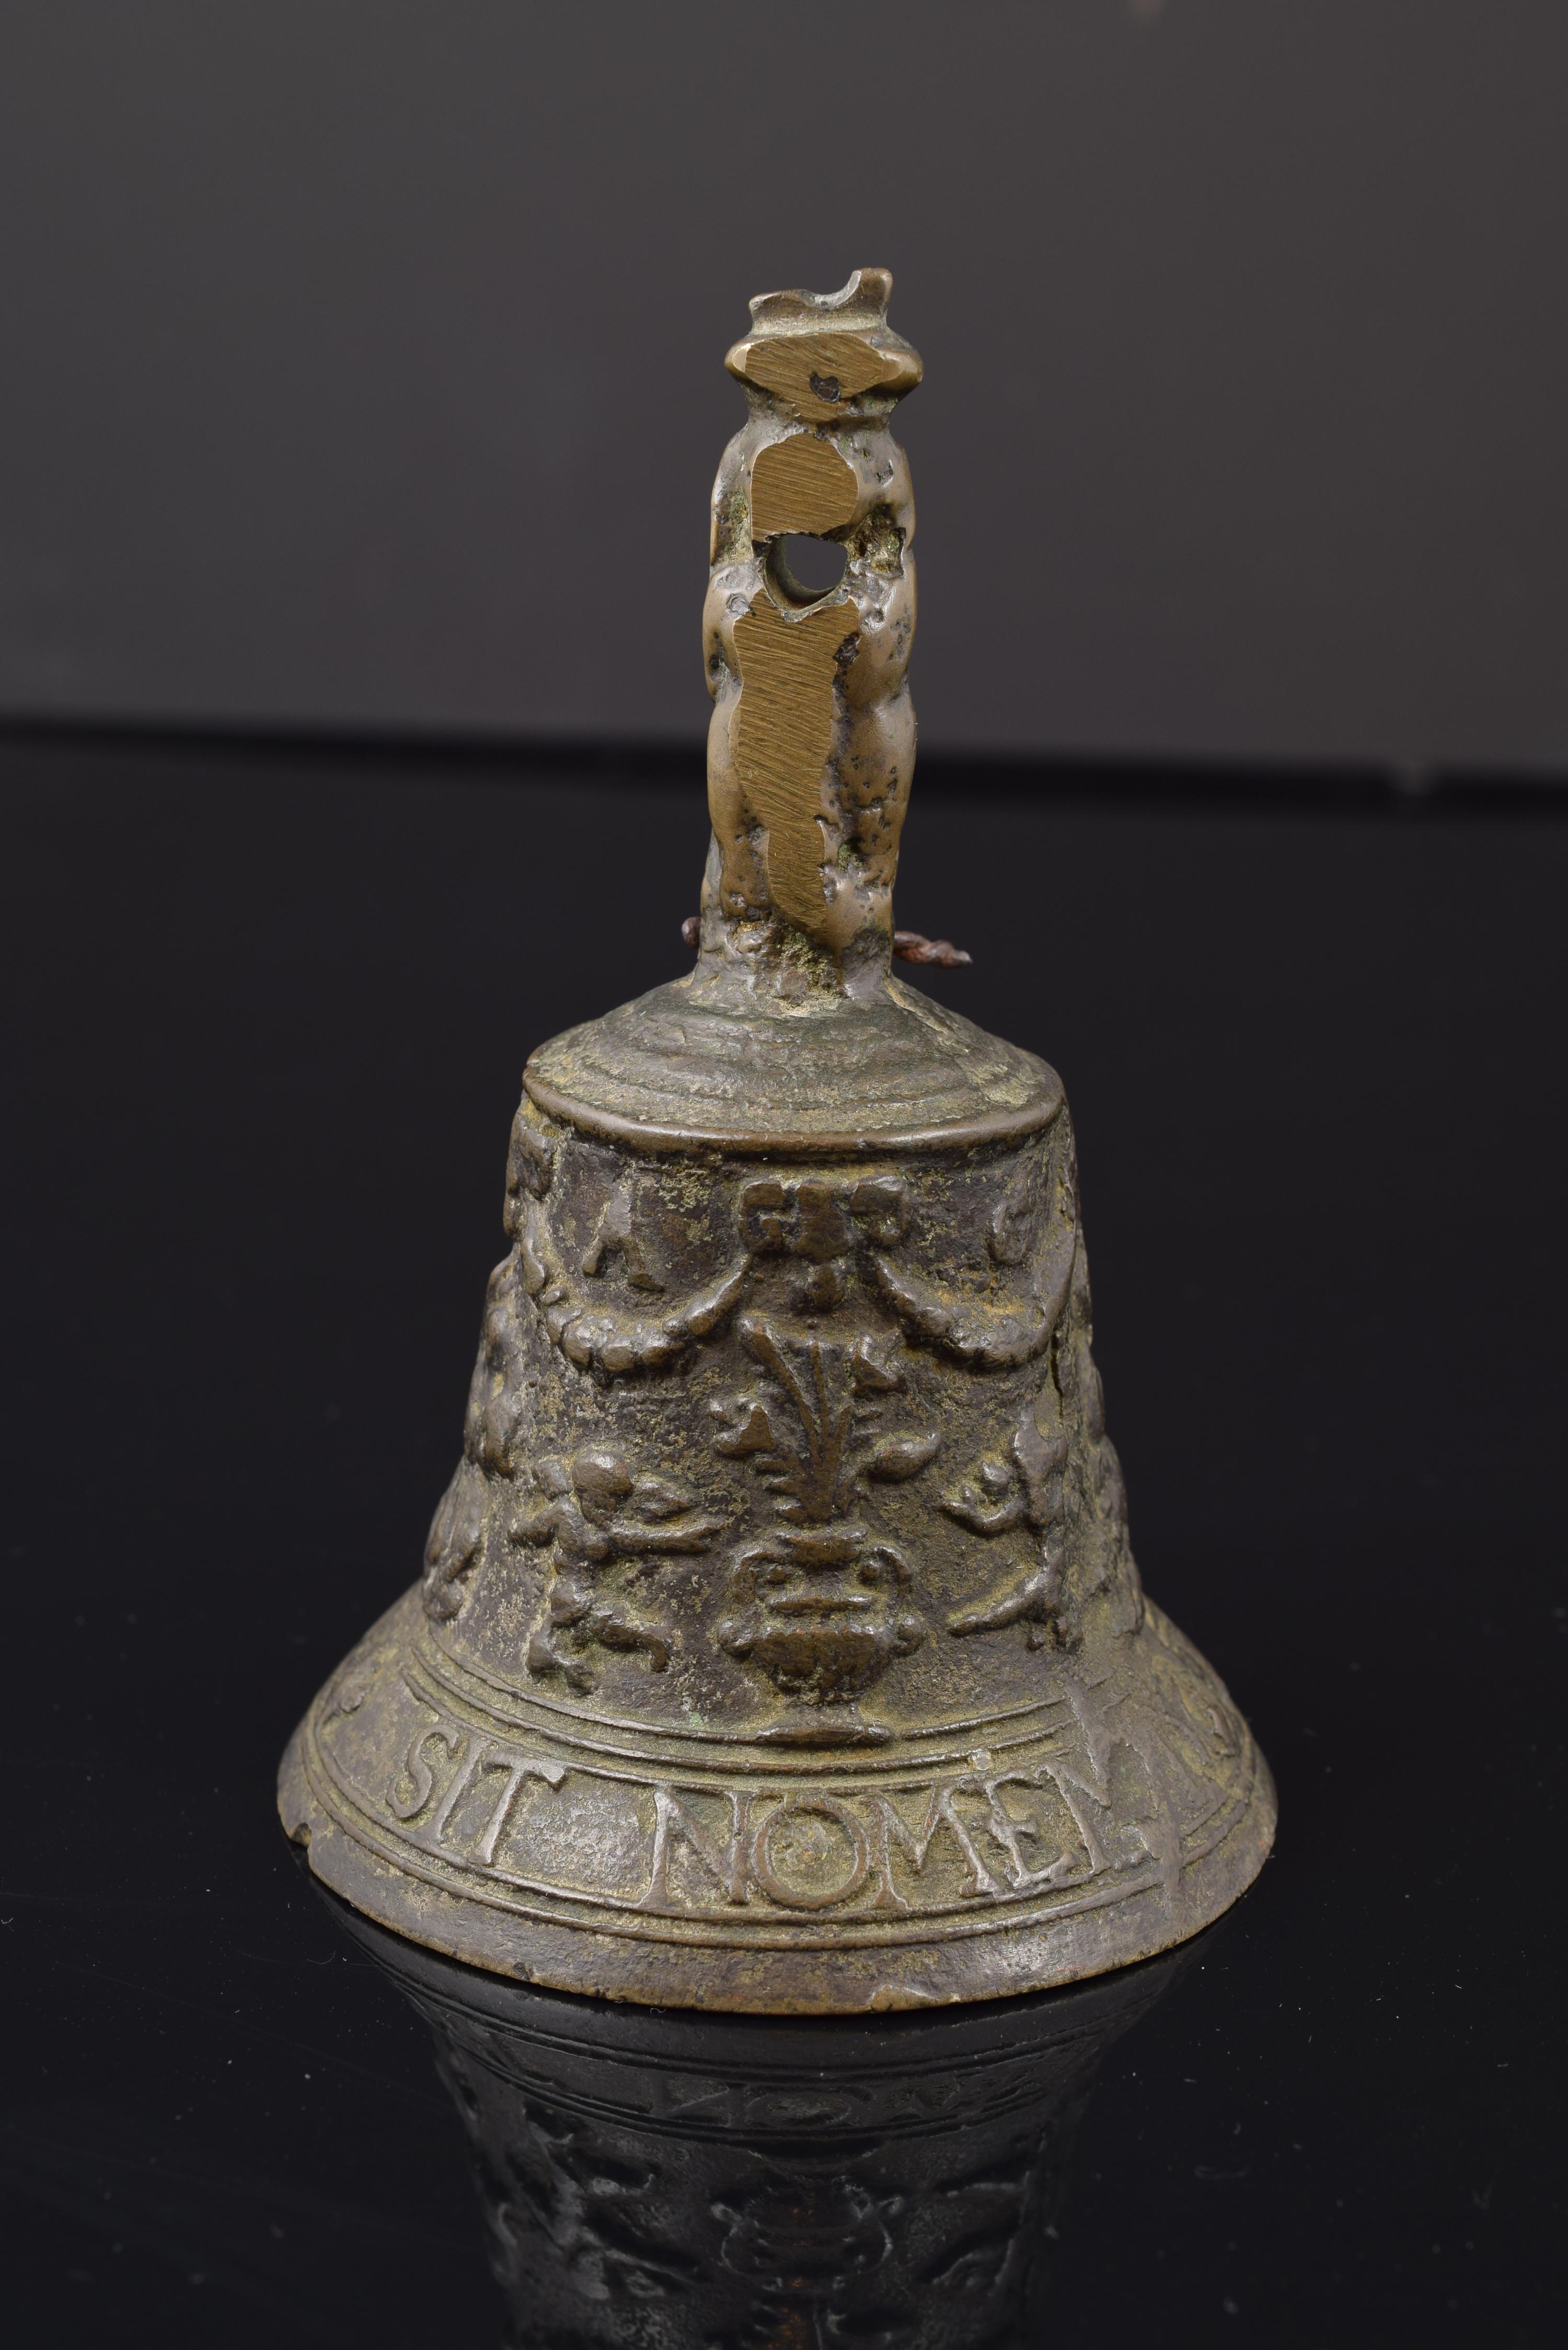 Bronze bell, 16th century. Mechelen 
 Bronze bell with religious legend in Latin on the foot and scenes in the middle. Due to use, it is somewhat difficult to distinguish the decorative elements: children, vases, garlands and bucraniums (typical of